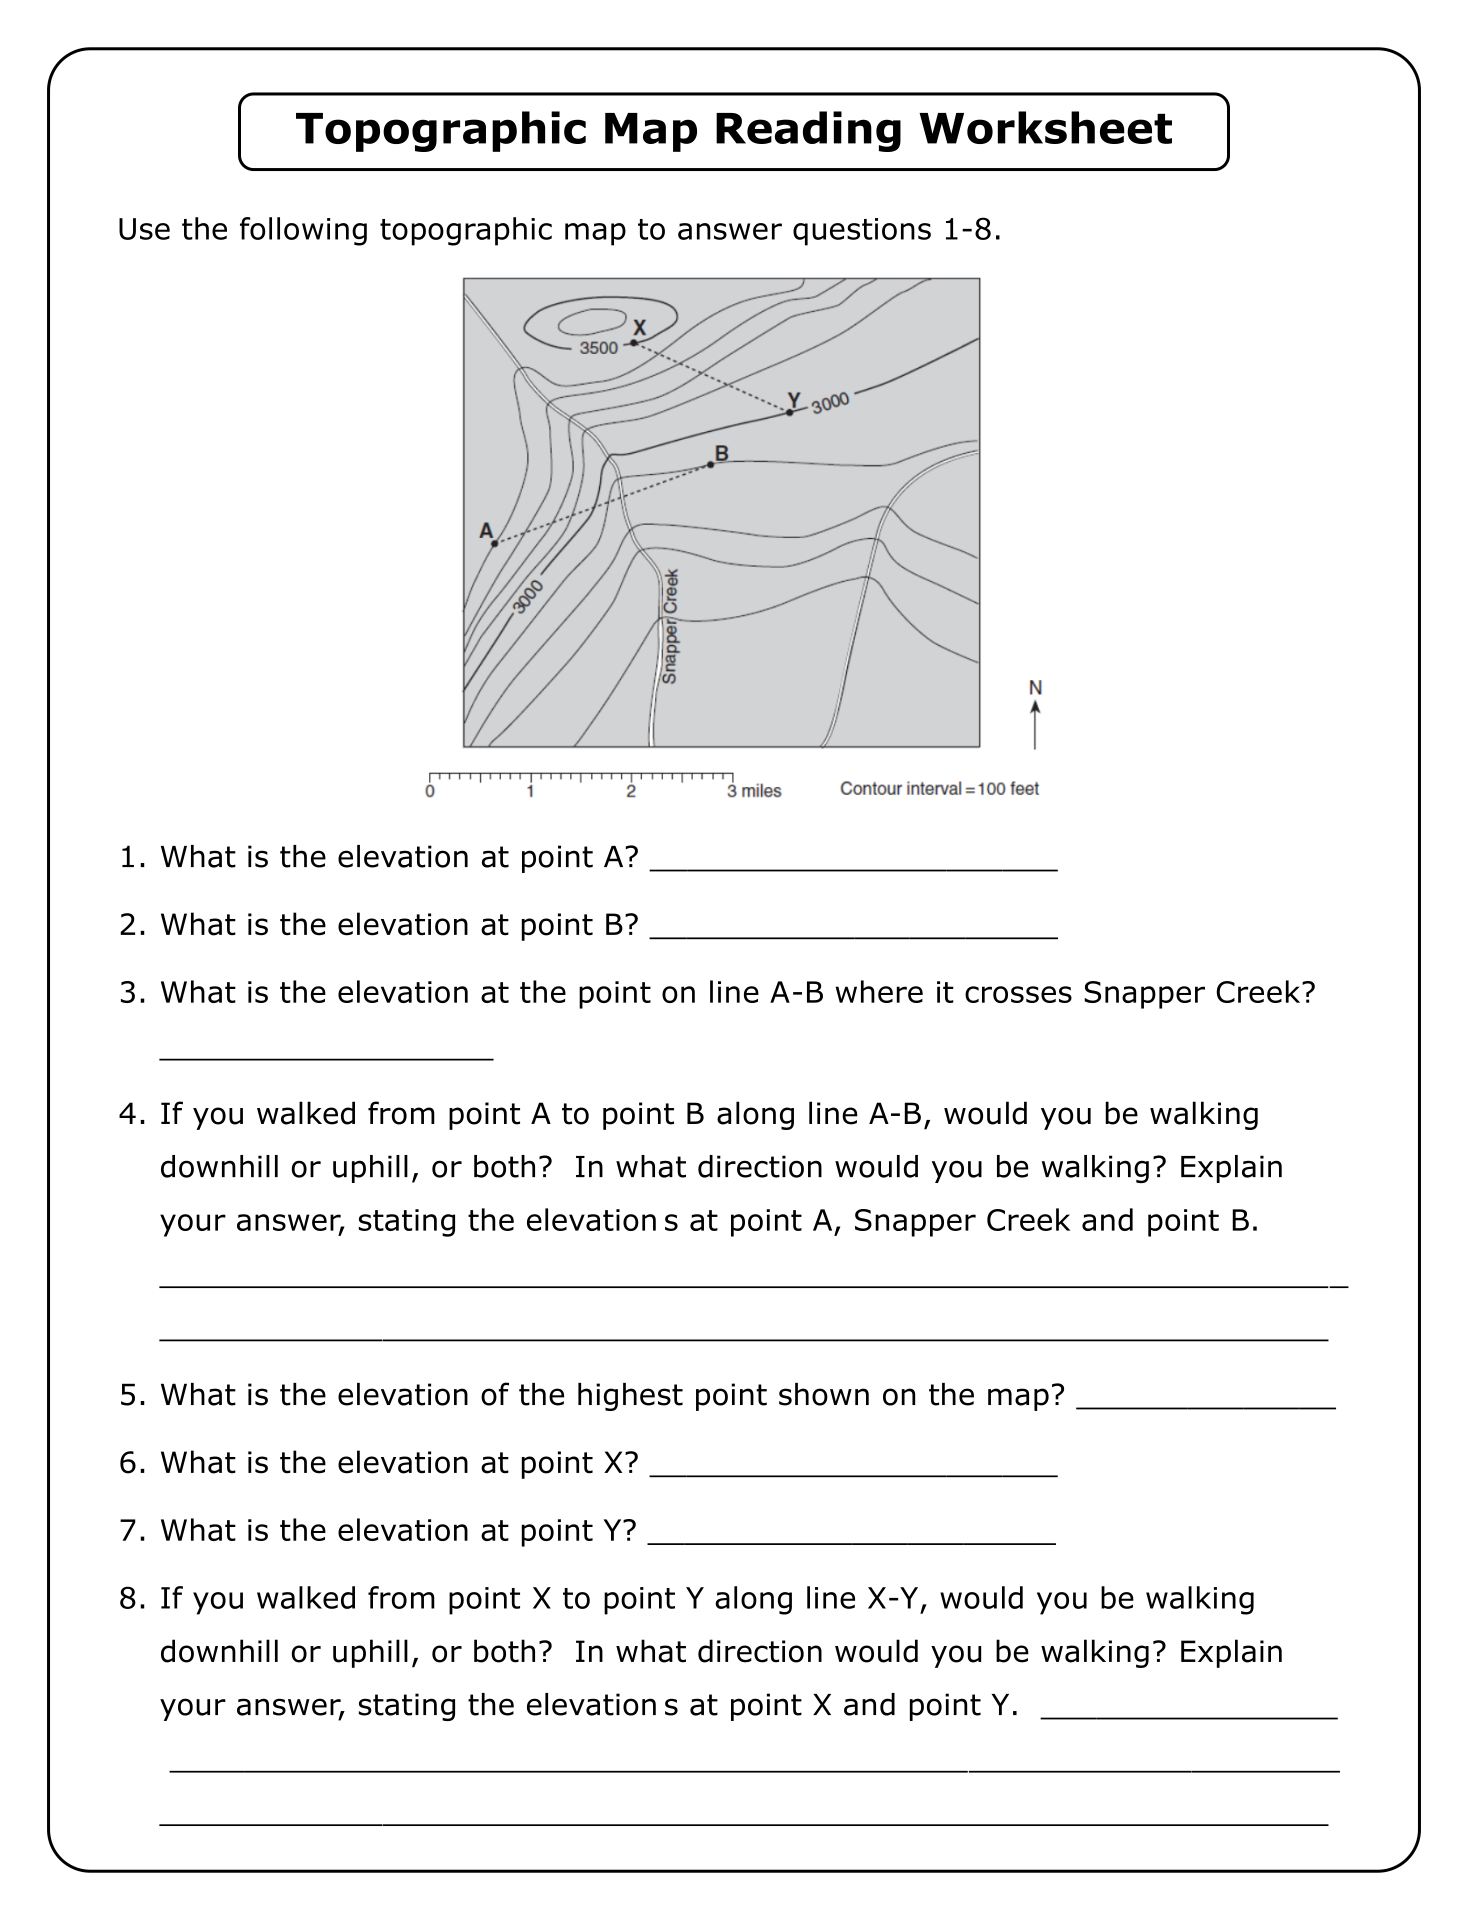 25 Best Topographic Map Worksheets Printable - printablee.com Throughout Reading A Map Worksheet